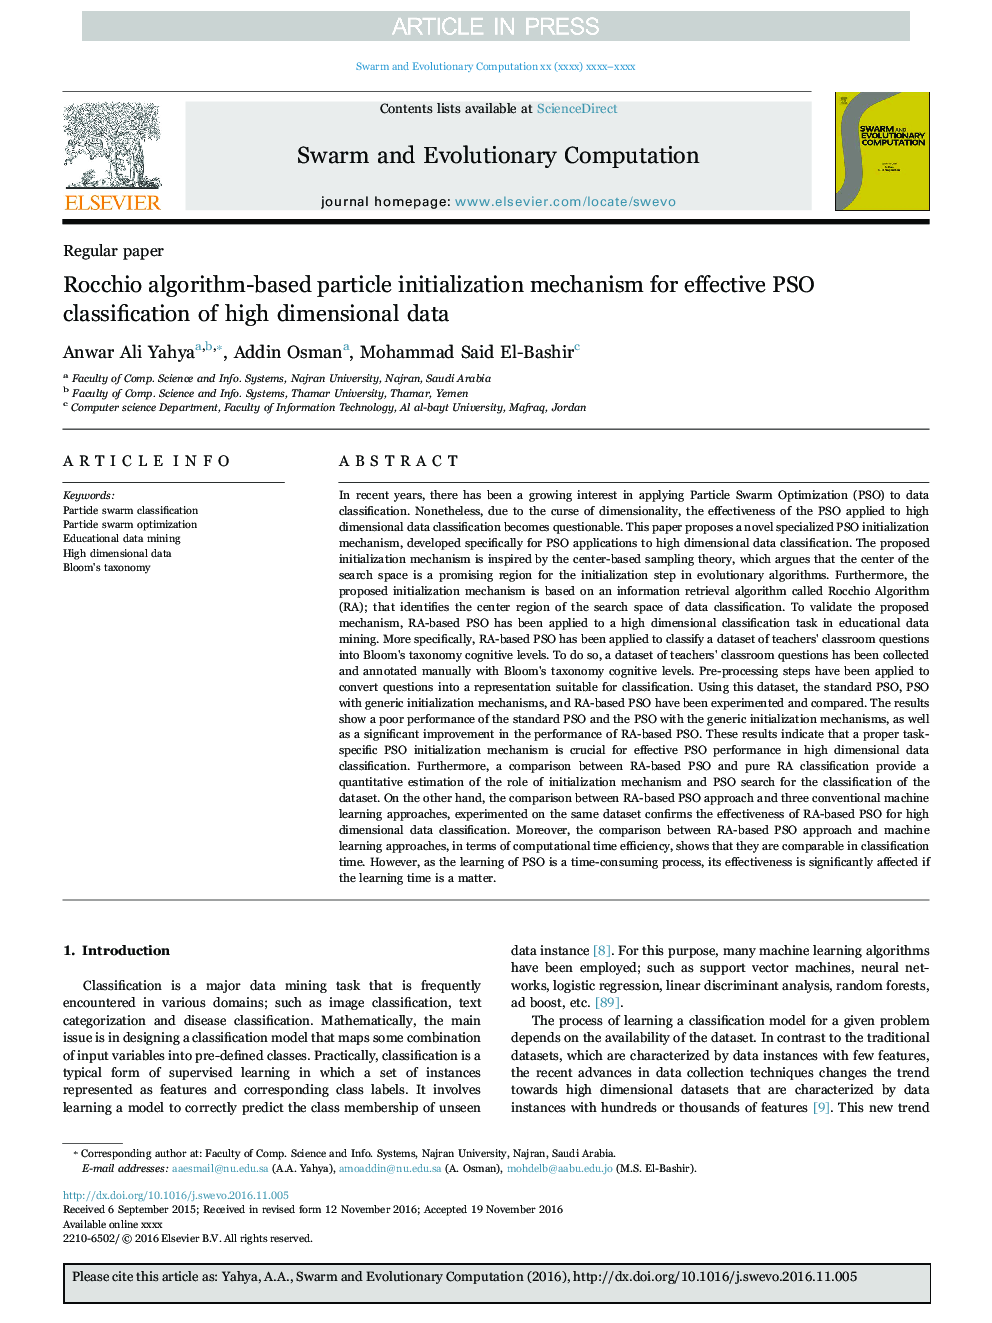 Rocchio algorithm-based particle initialization mechanism for effective PSO classification of high dimensional data